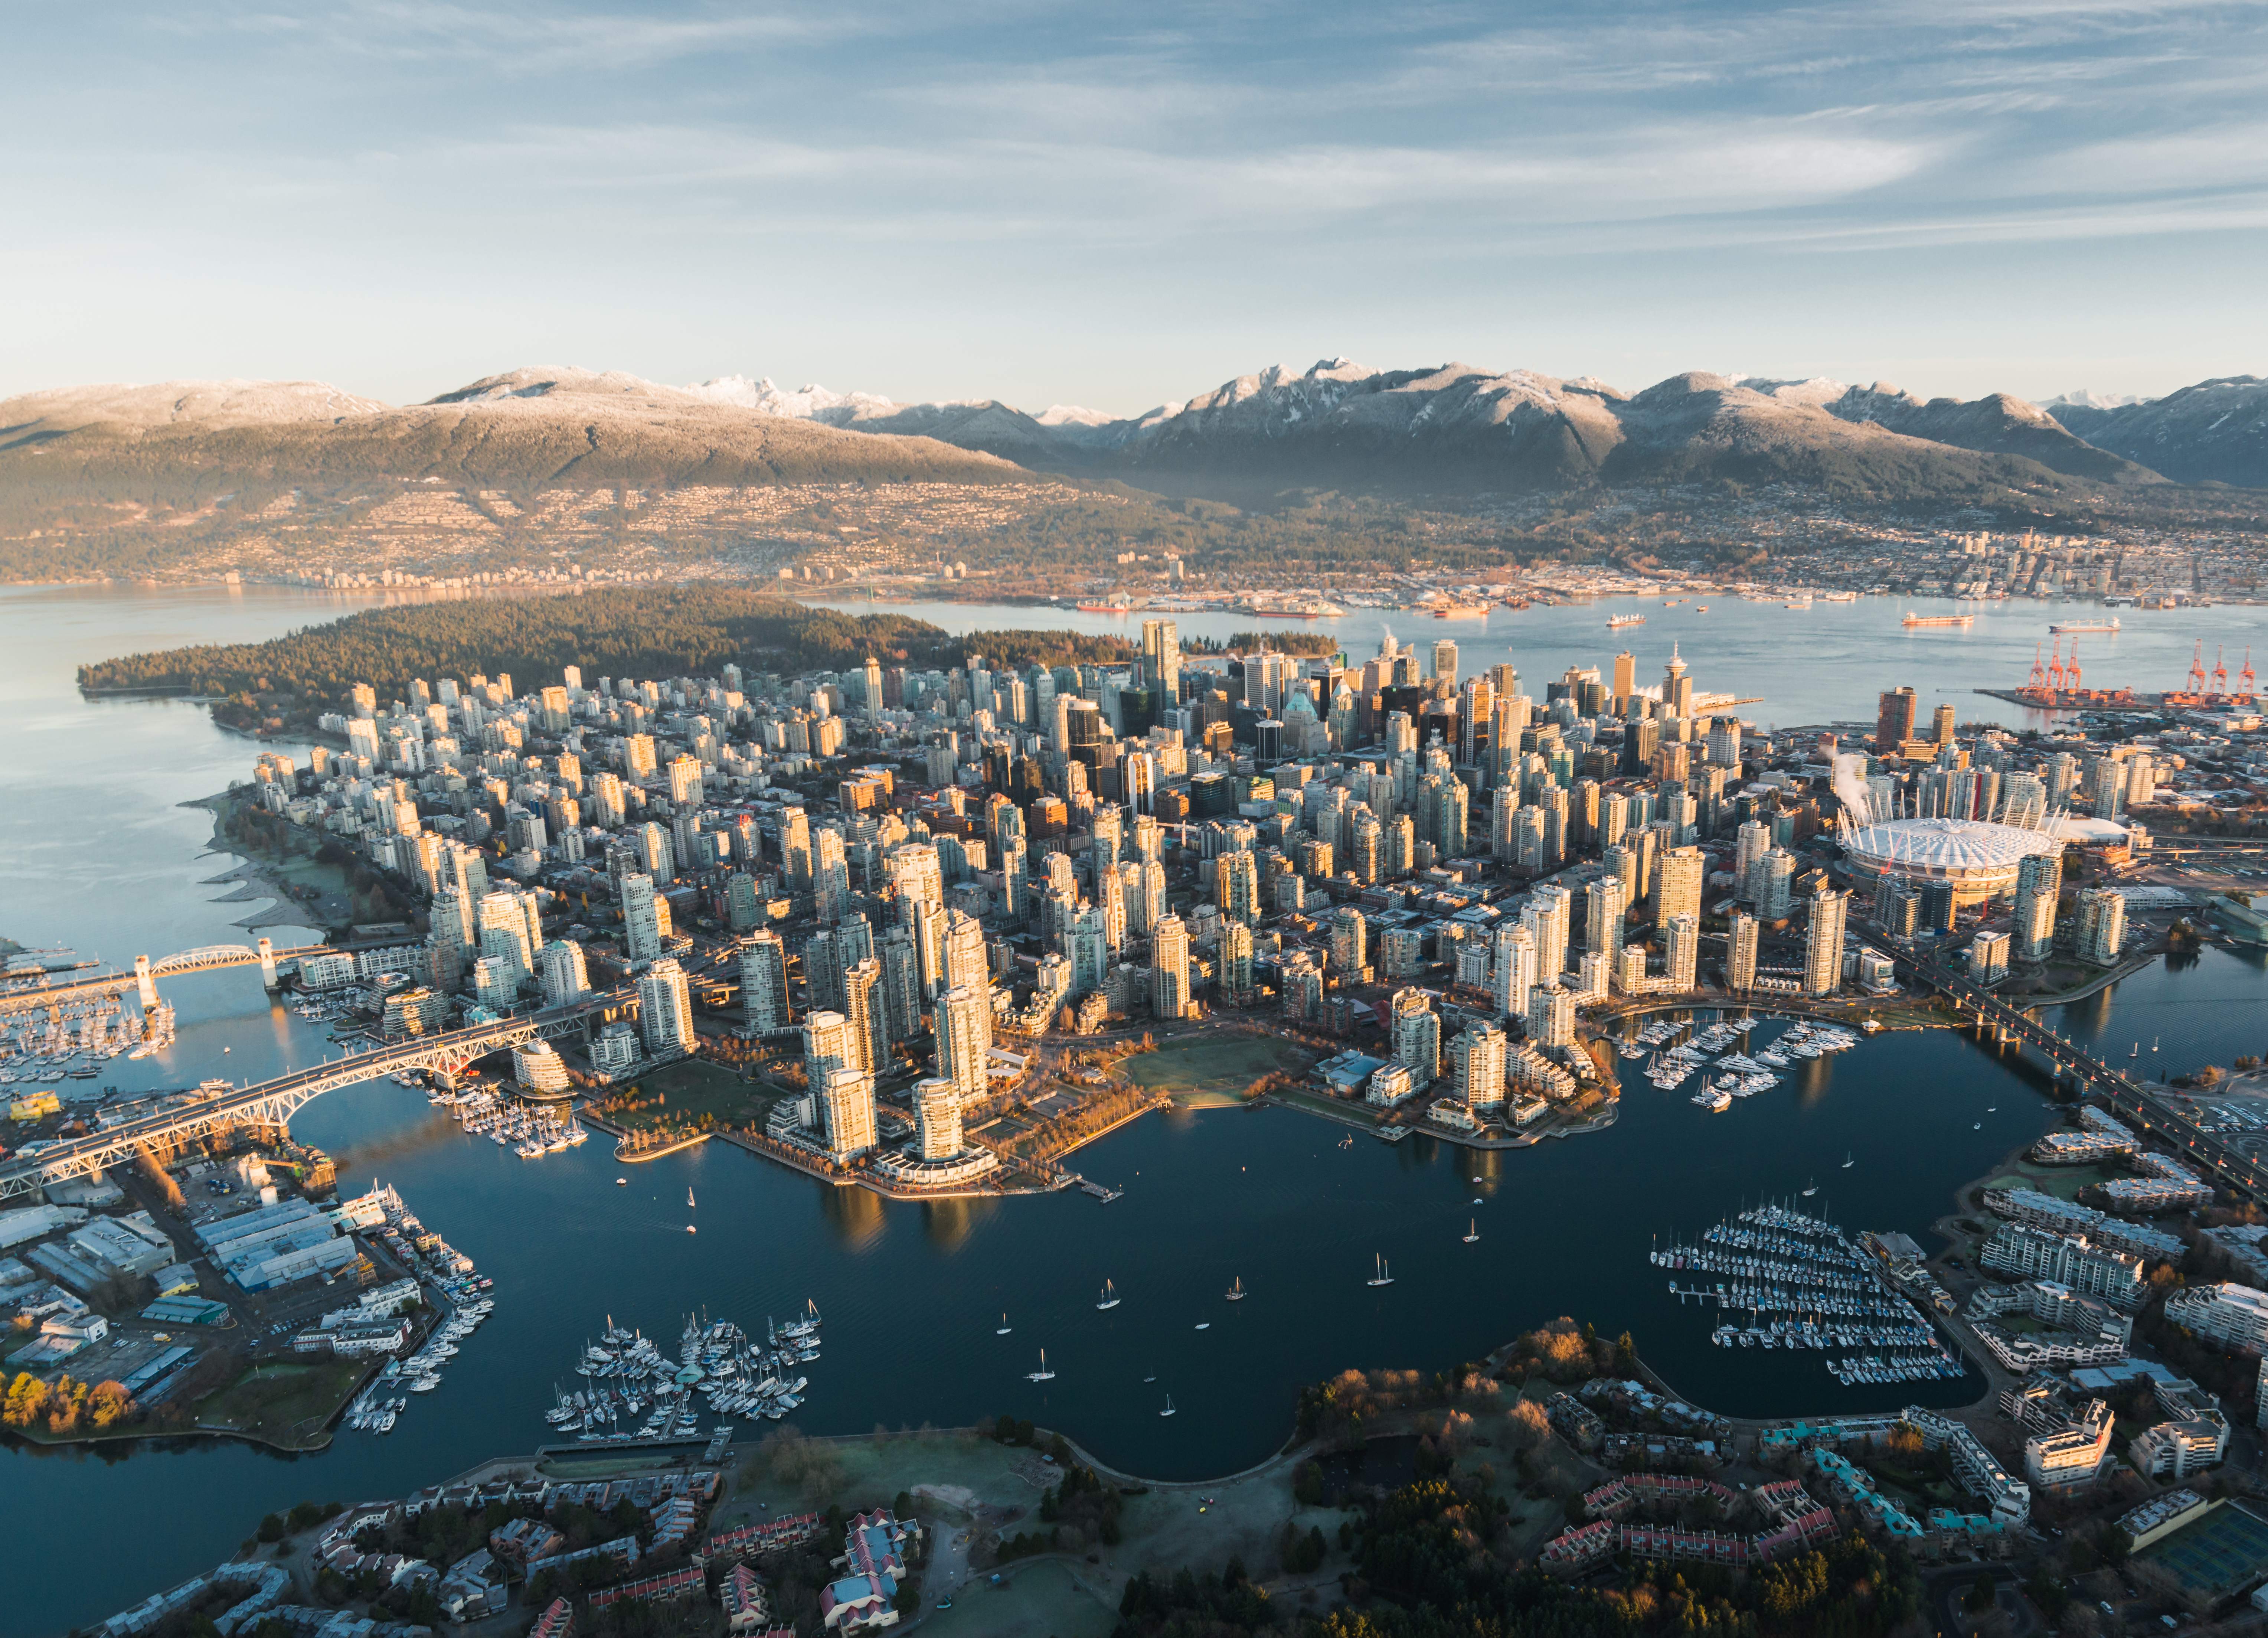 An aerial view of Vancouver, British Columbia